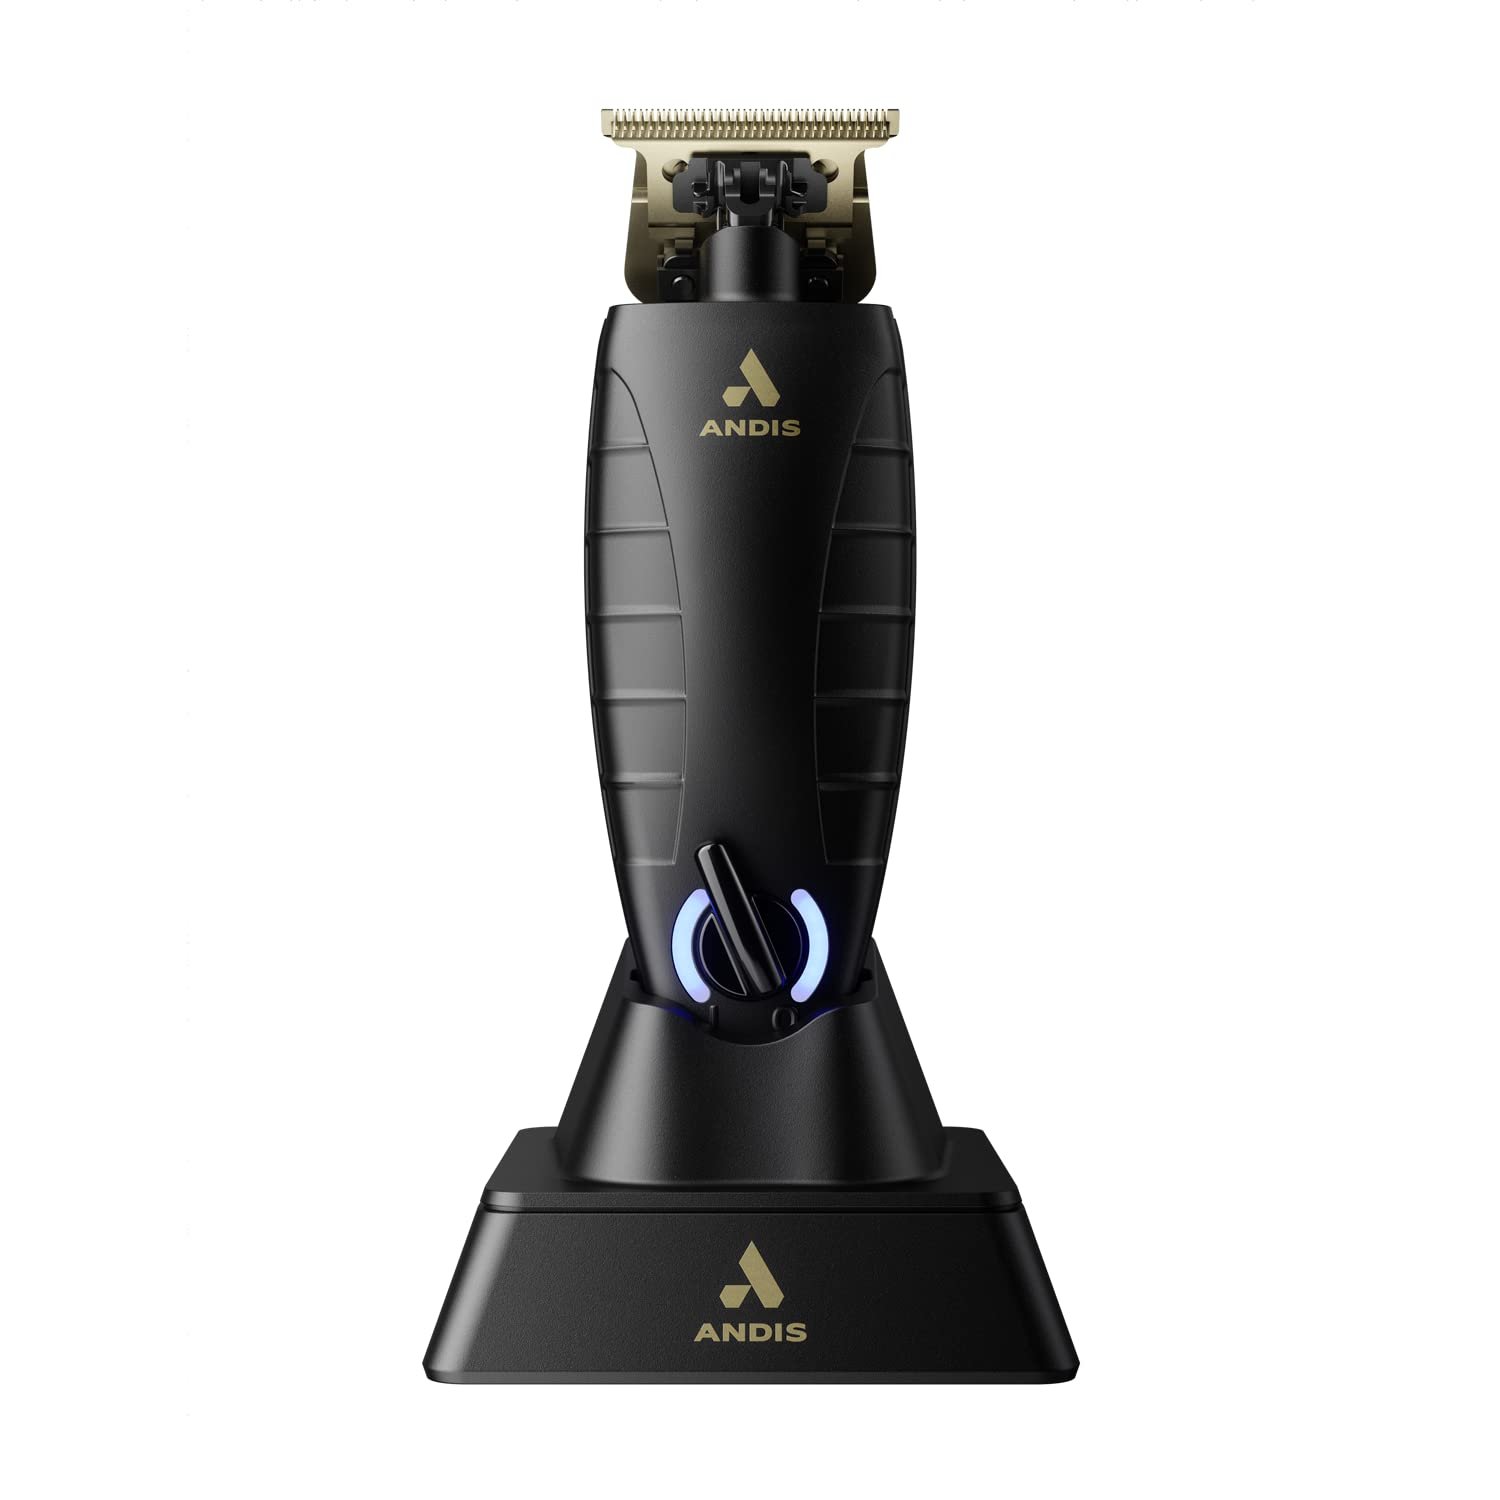  Andis 74150 GTX-EXO Professional Cord/Cordless Lithium-ion Electric Beard &amp; Hair Trimmer with Charging Stand, Black